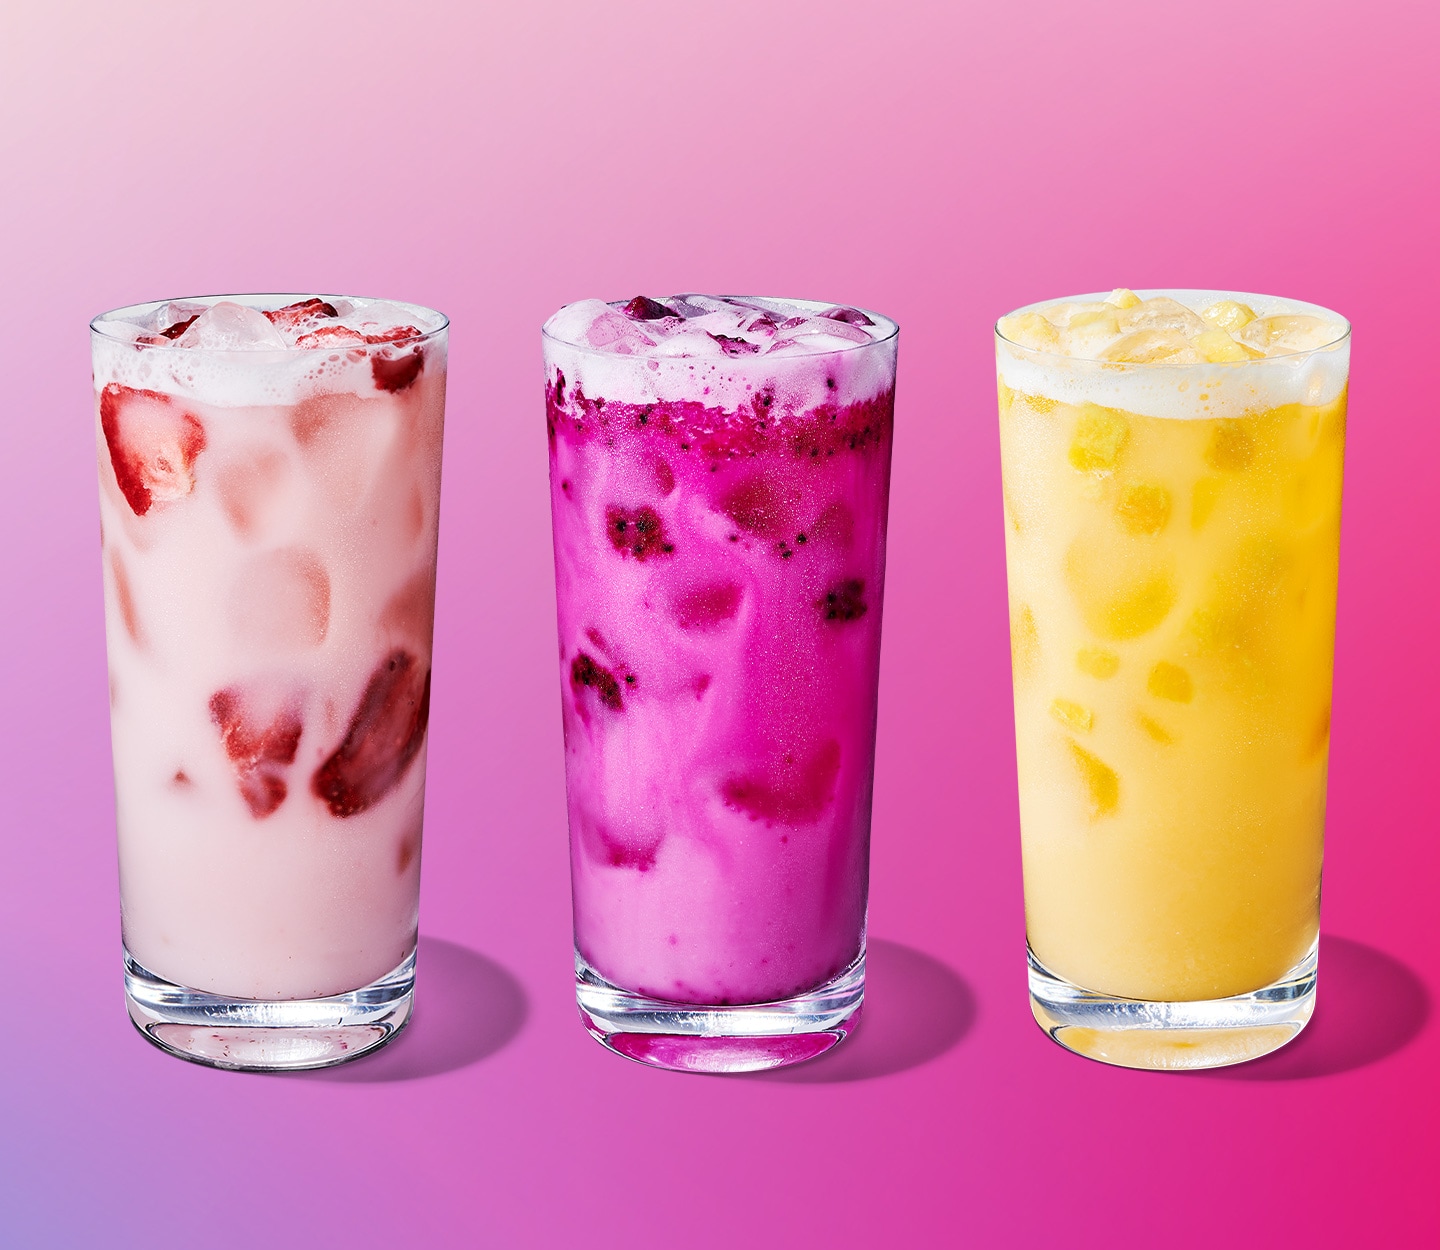 A pink drink with strawberry pieces, a darker pink drink with dragonfruit pieces, a yellow with pineapple pieces.